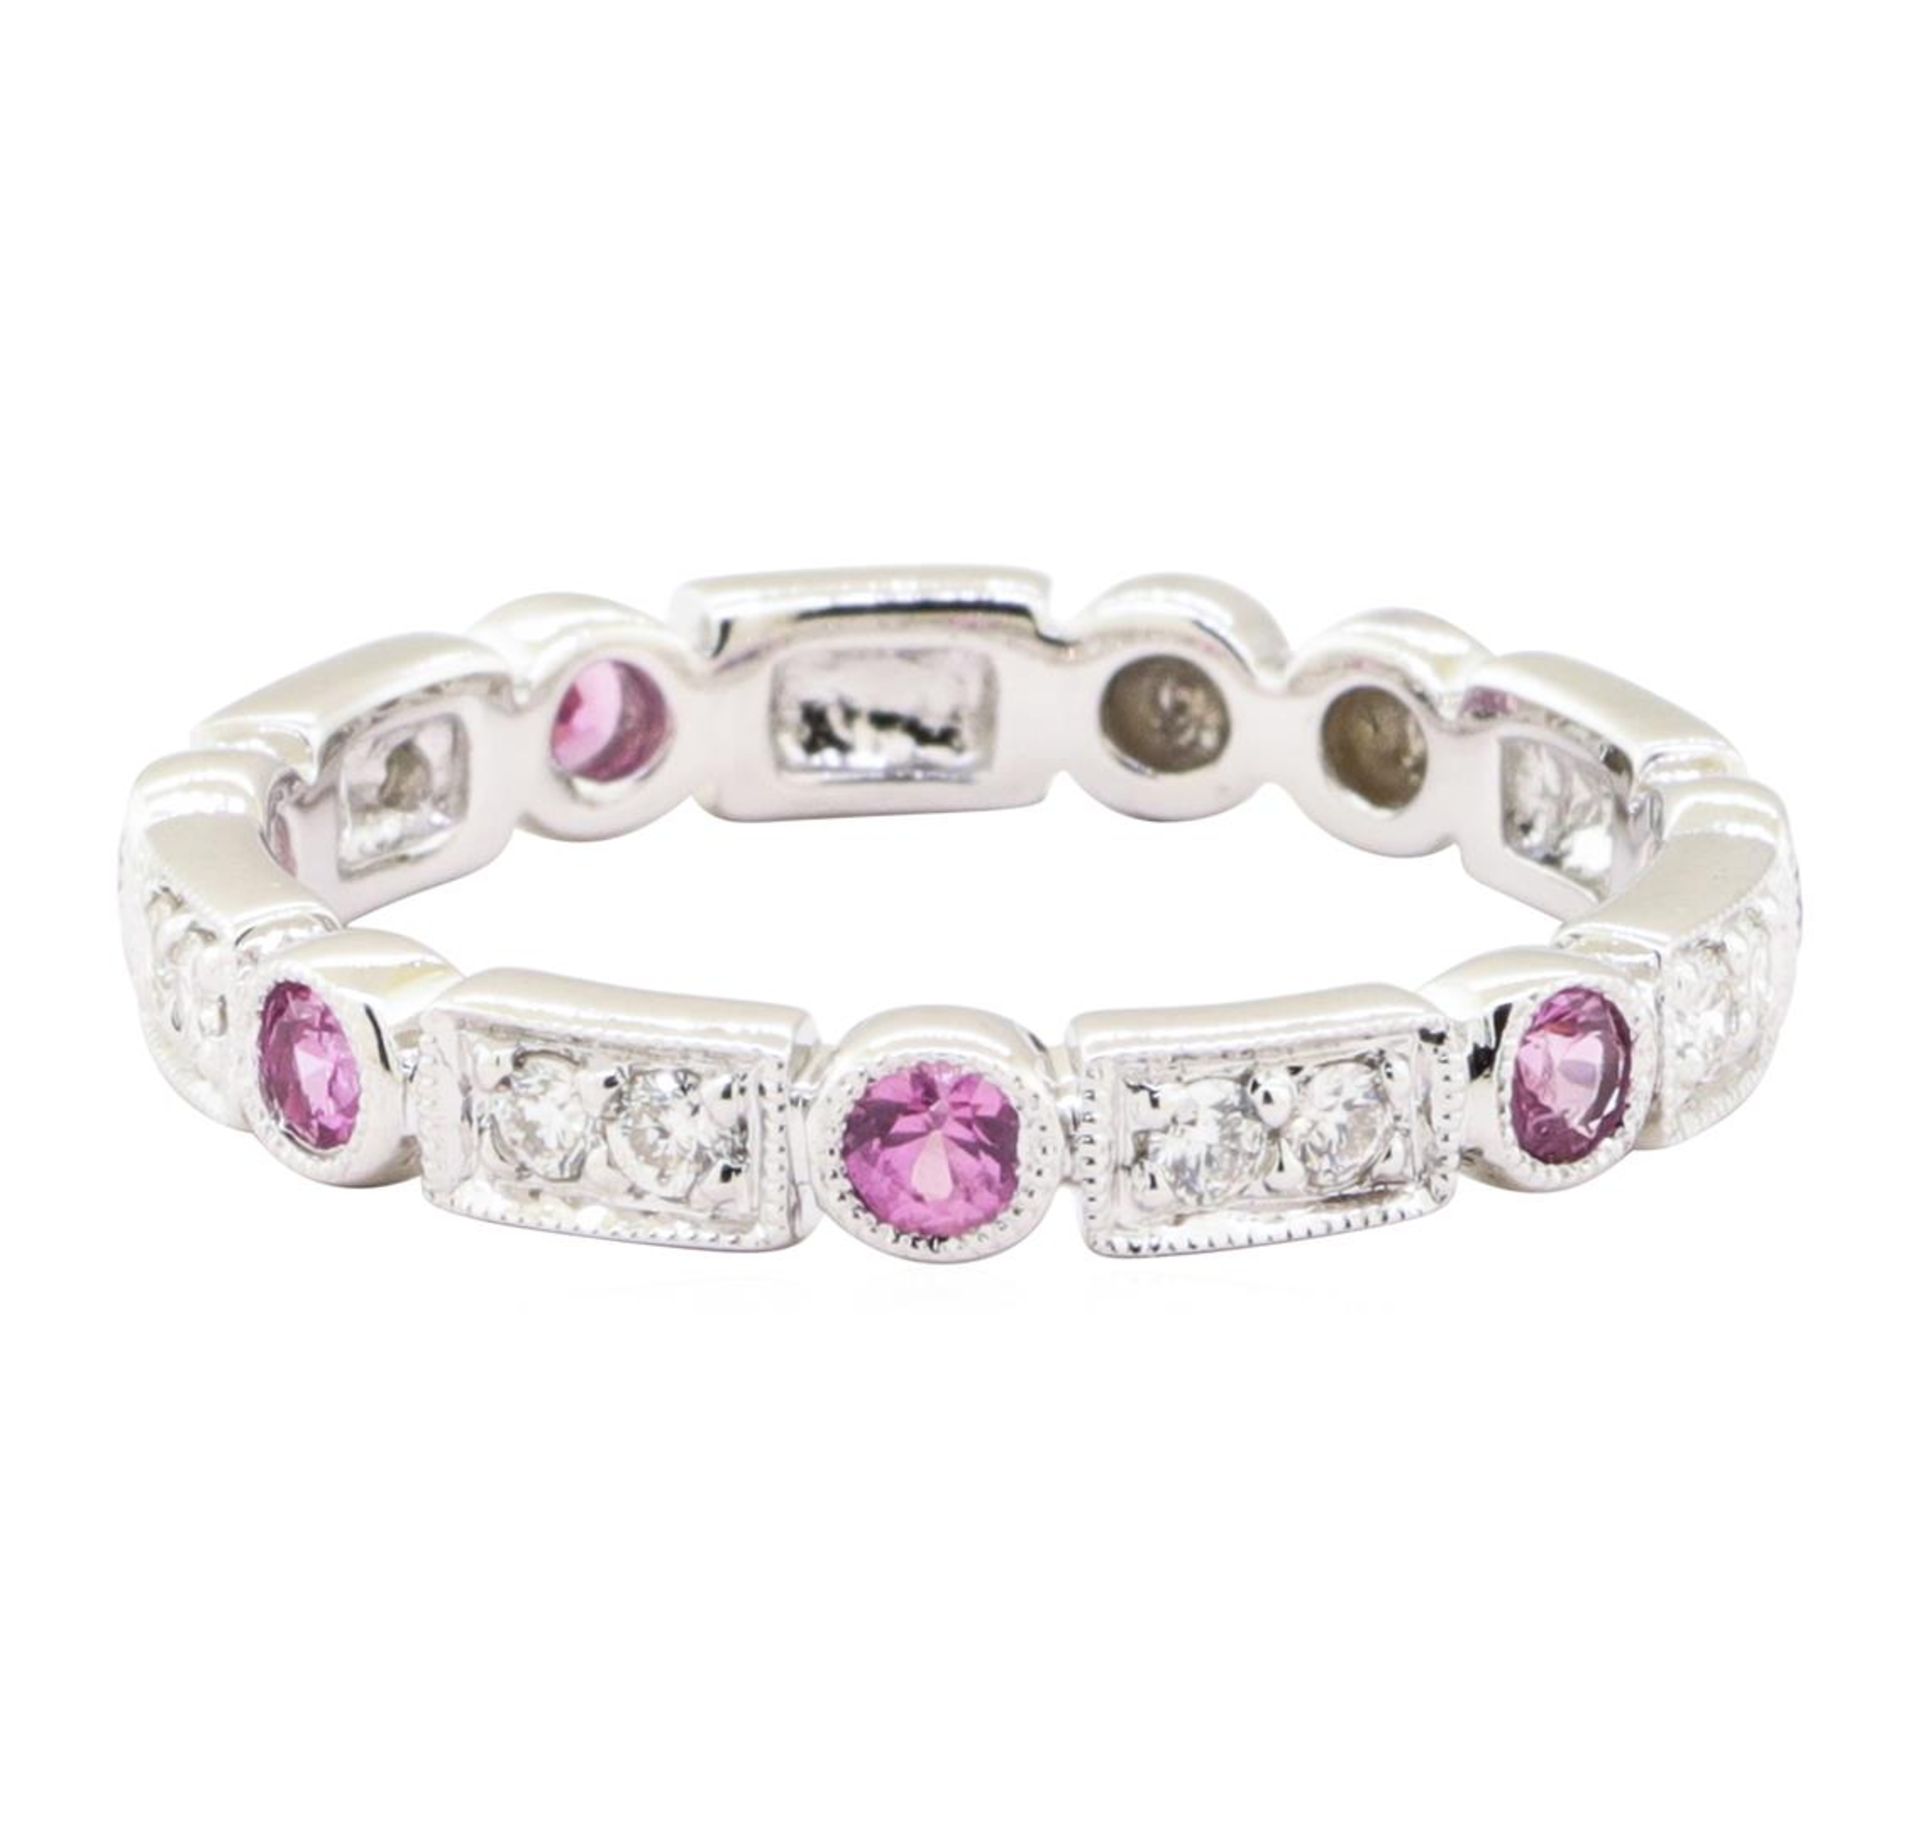 0.55 ctw Pink Sapphire and Diamond Ring - 14KT White Gold - Image 2 of 4